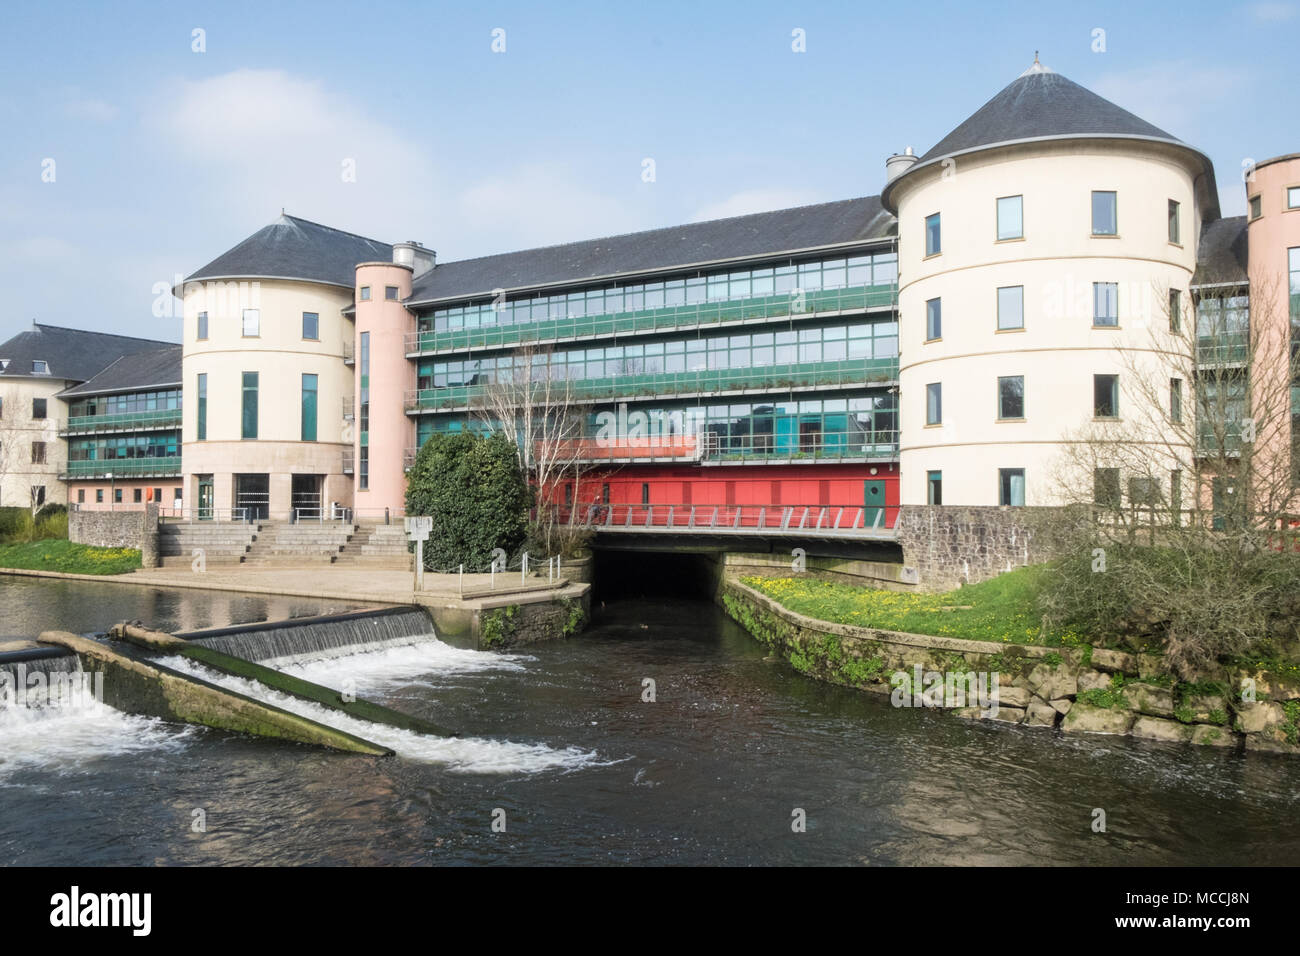 Welsh,Government,Civic Centre,local,county,council,building,next,to,Western Cleddau,River ,Haverfordwest,Pembrokeshire,West,Wales,Wales,Welsh,UK,U.K., Stock Photo